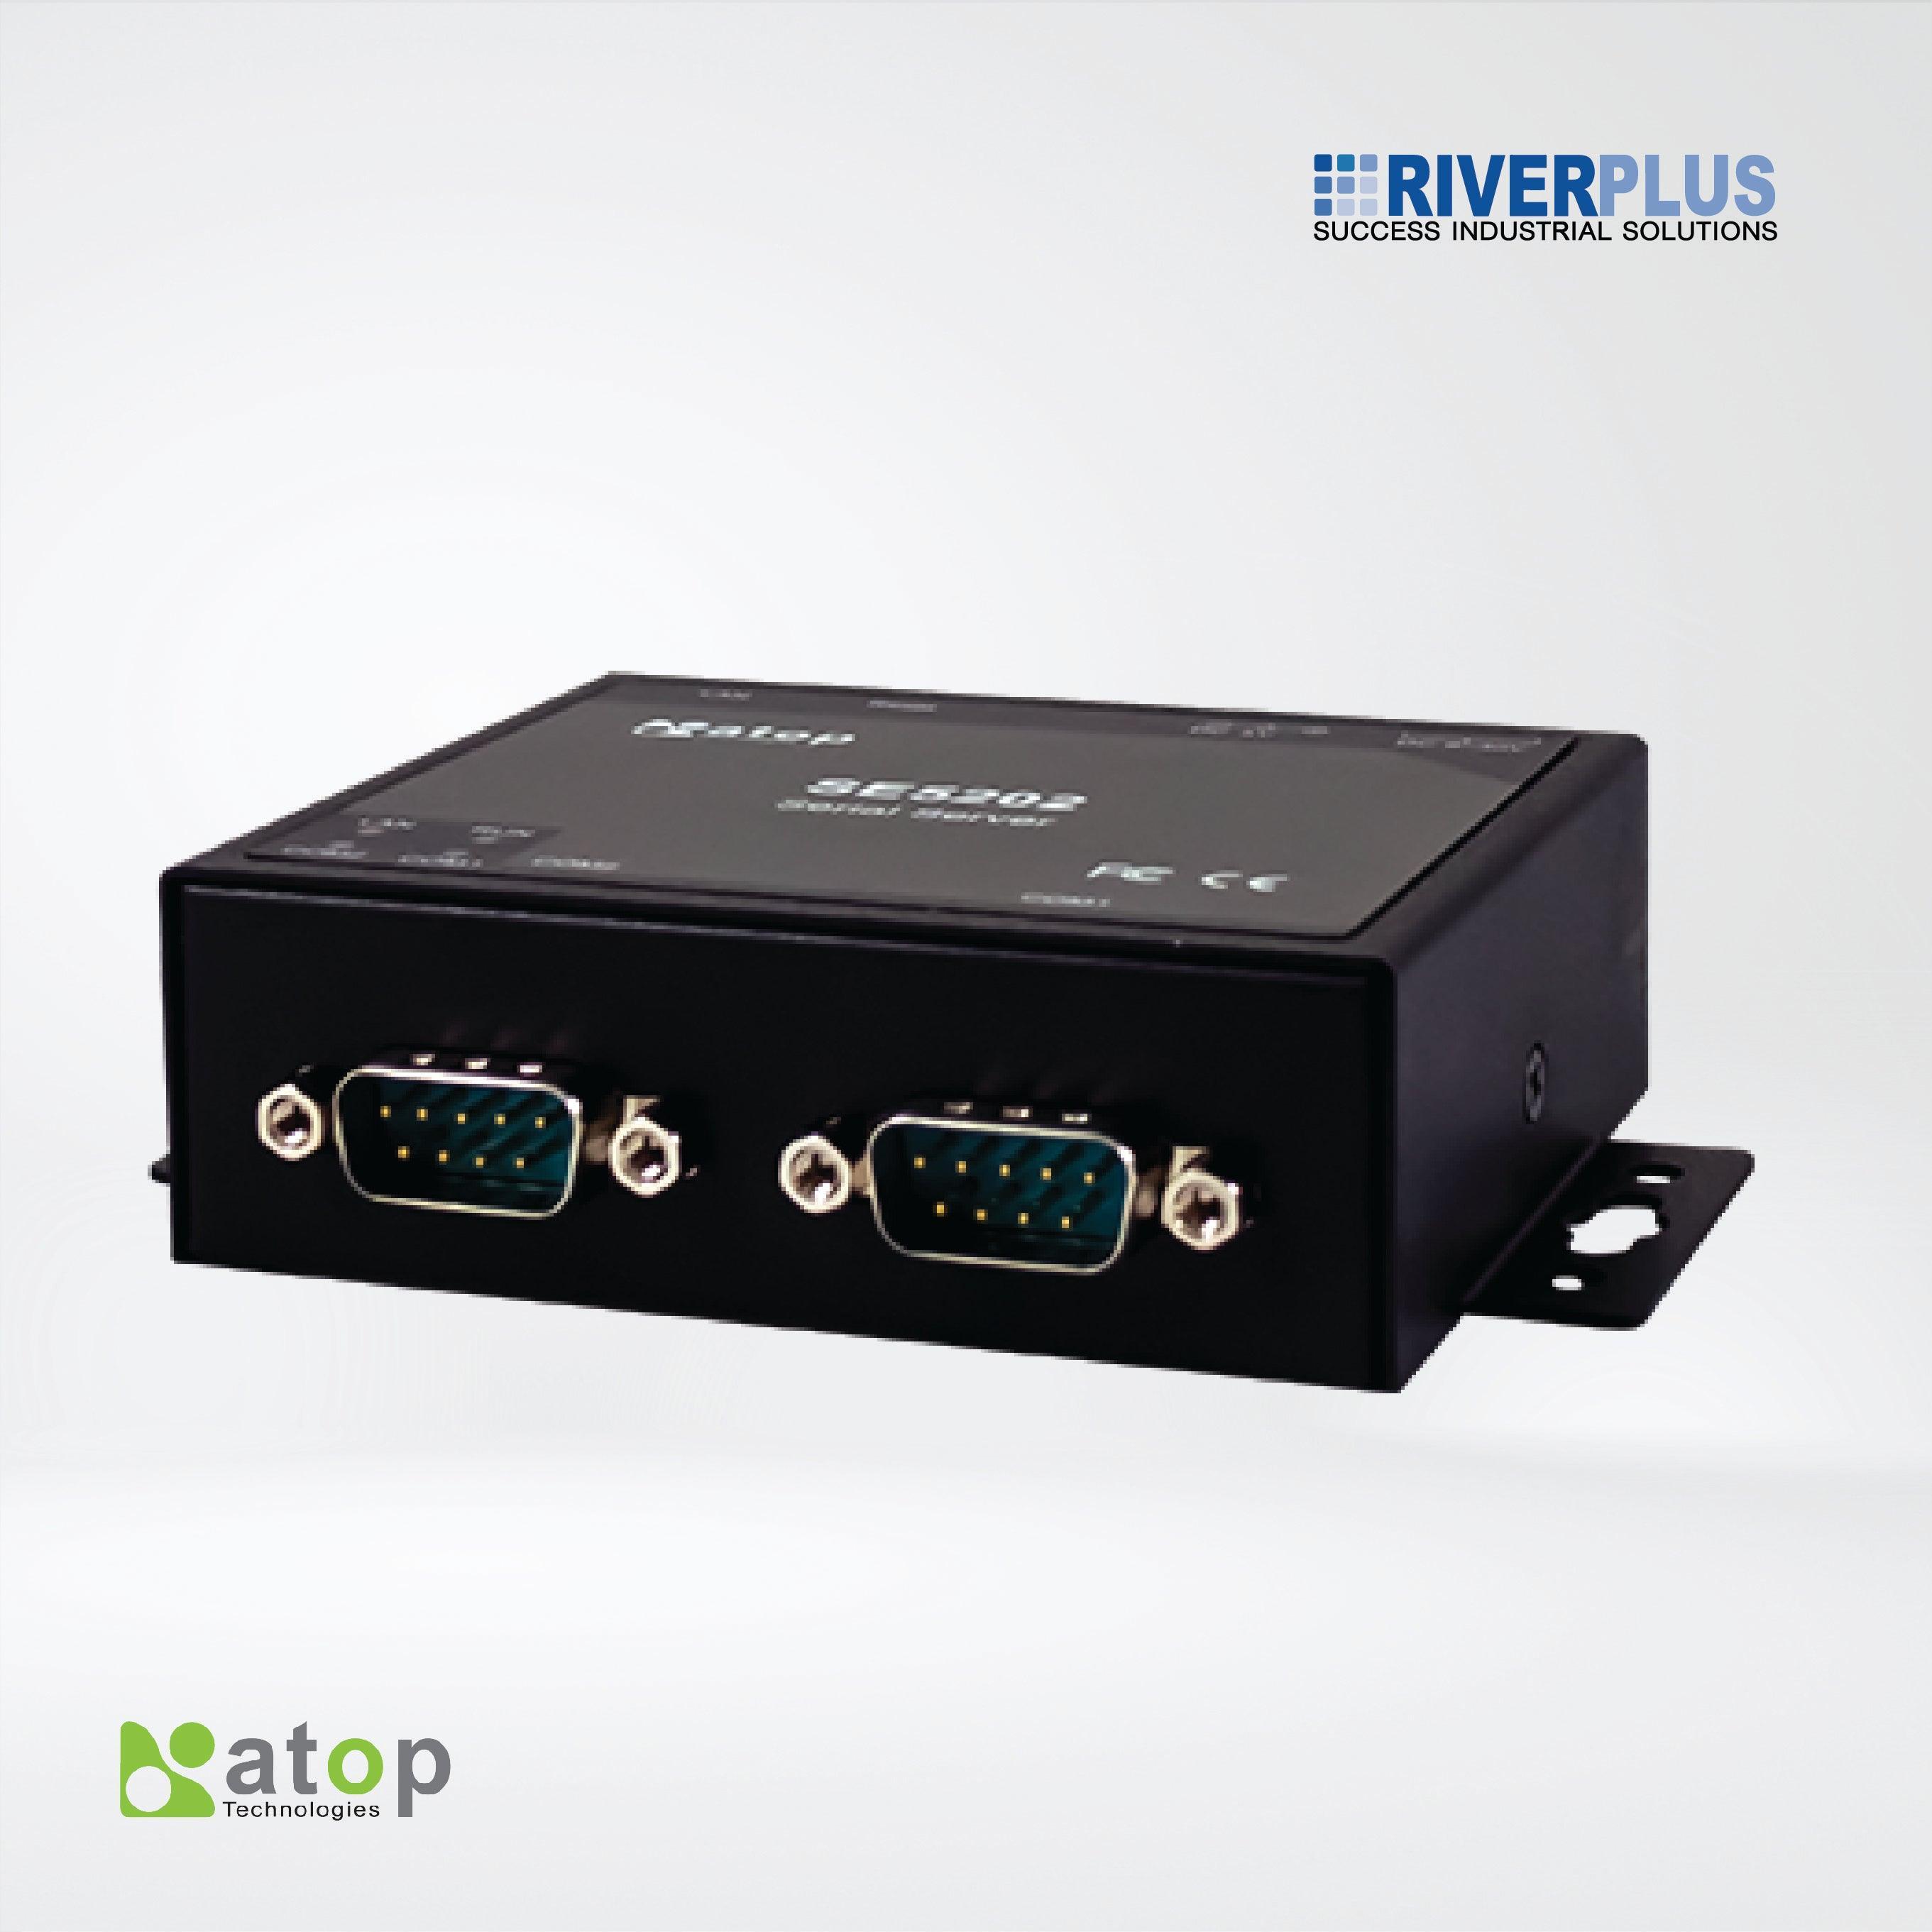 SE5202-Sis Compact 2-Port Industrial Serial Device Server, Field-Mount - Riverplus